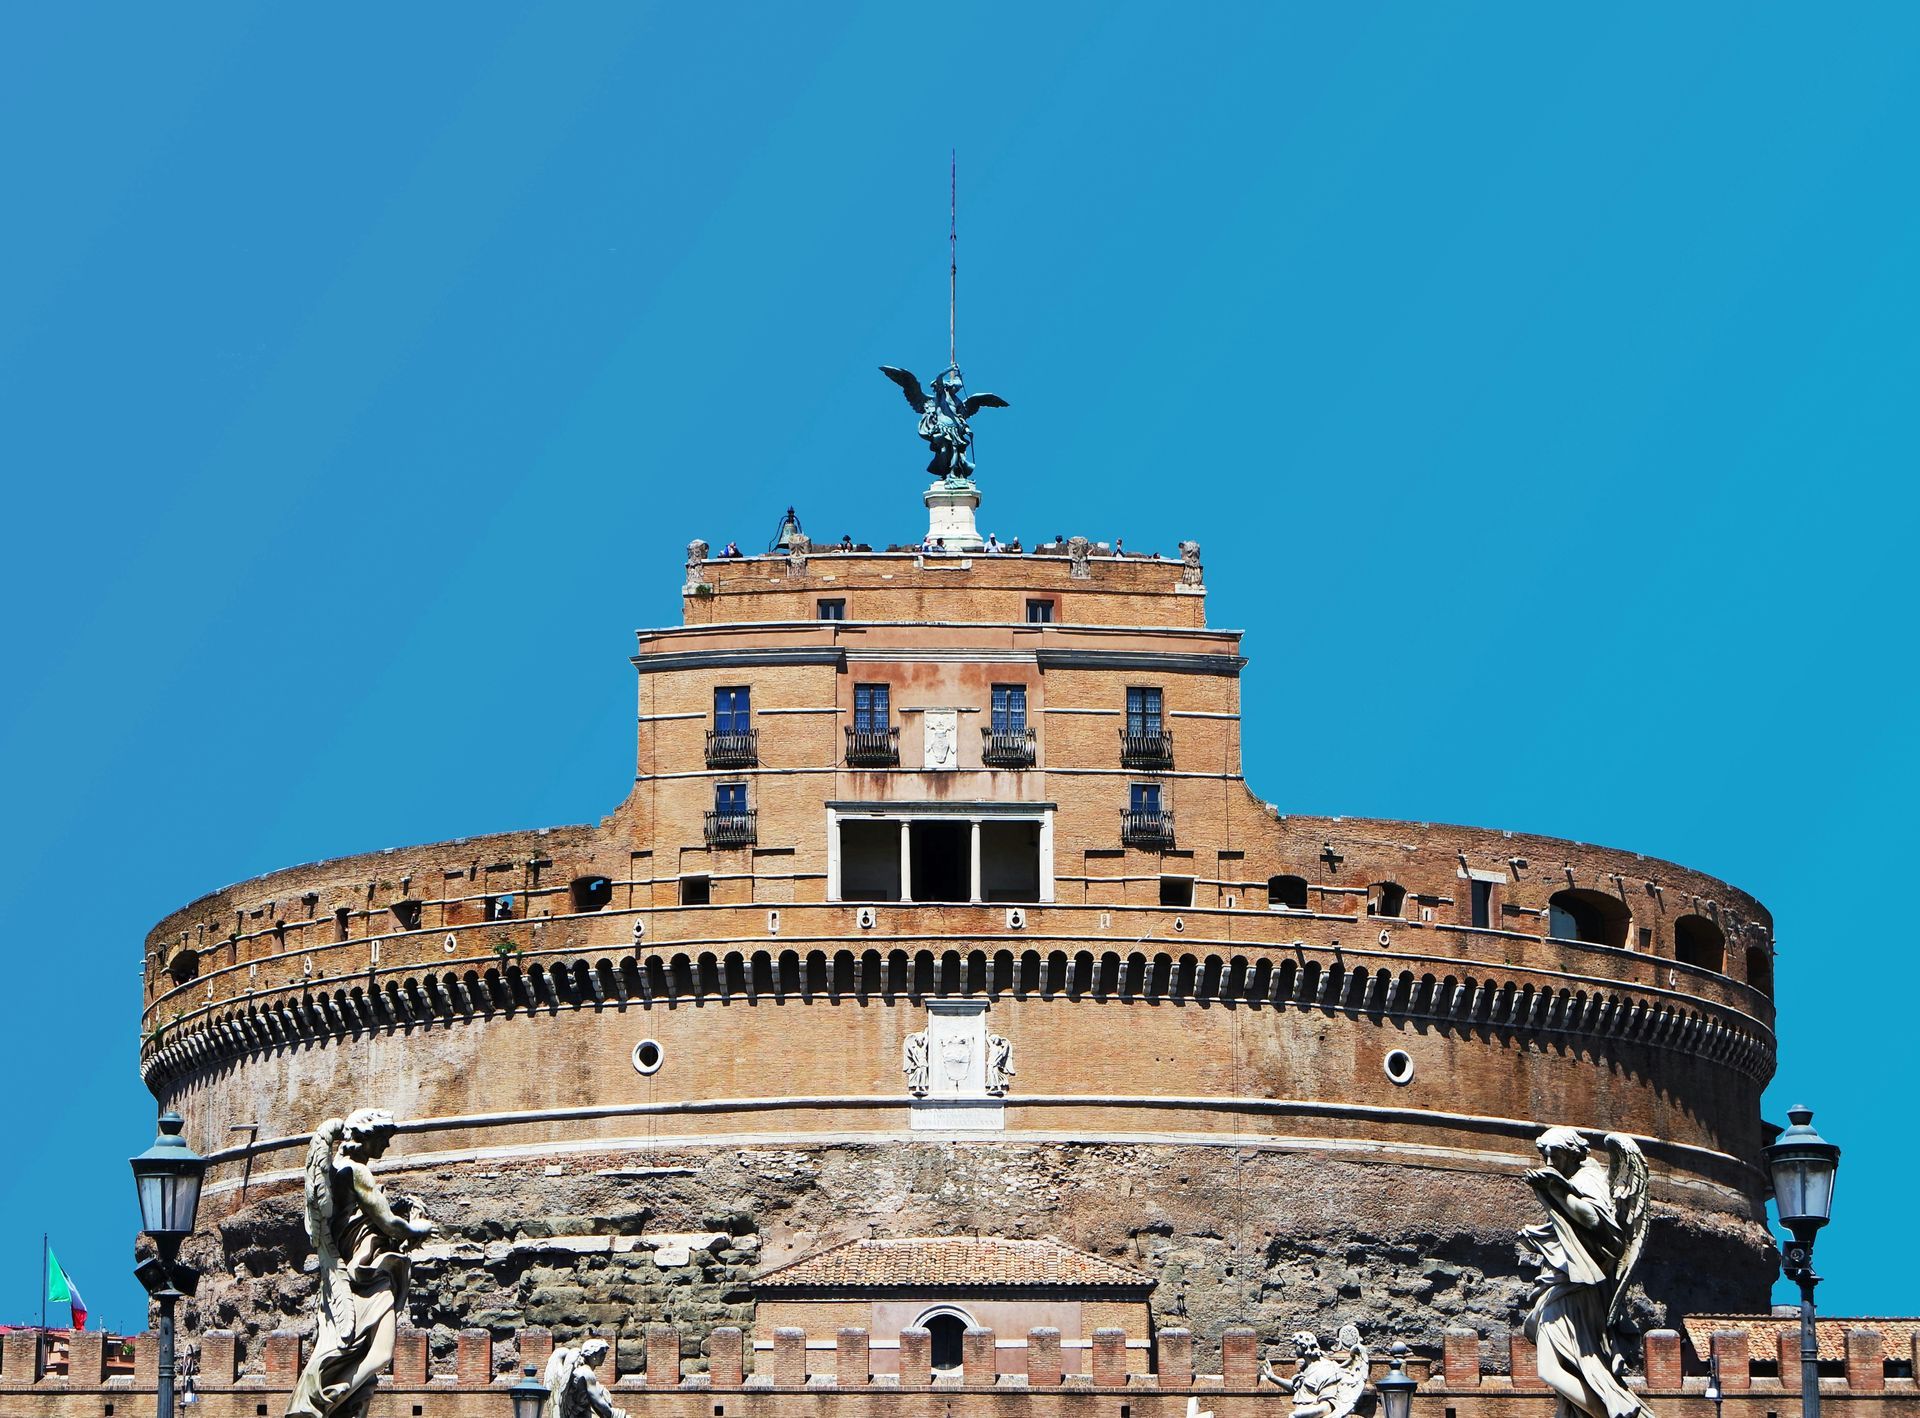 What is the Castel Sant’Angelo Rome famous for?